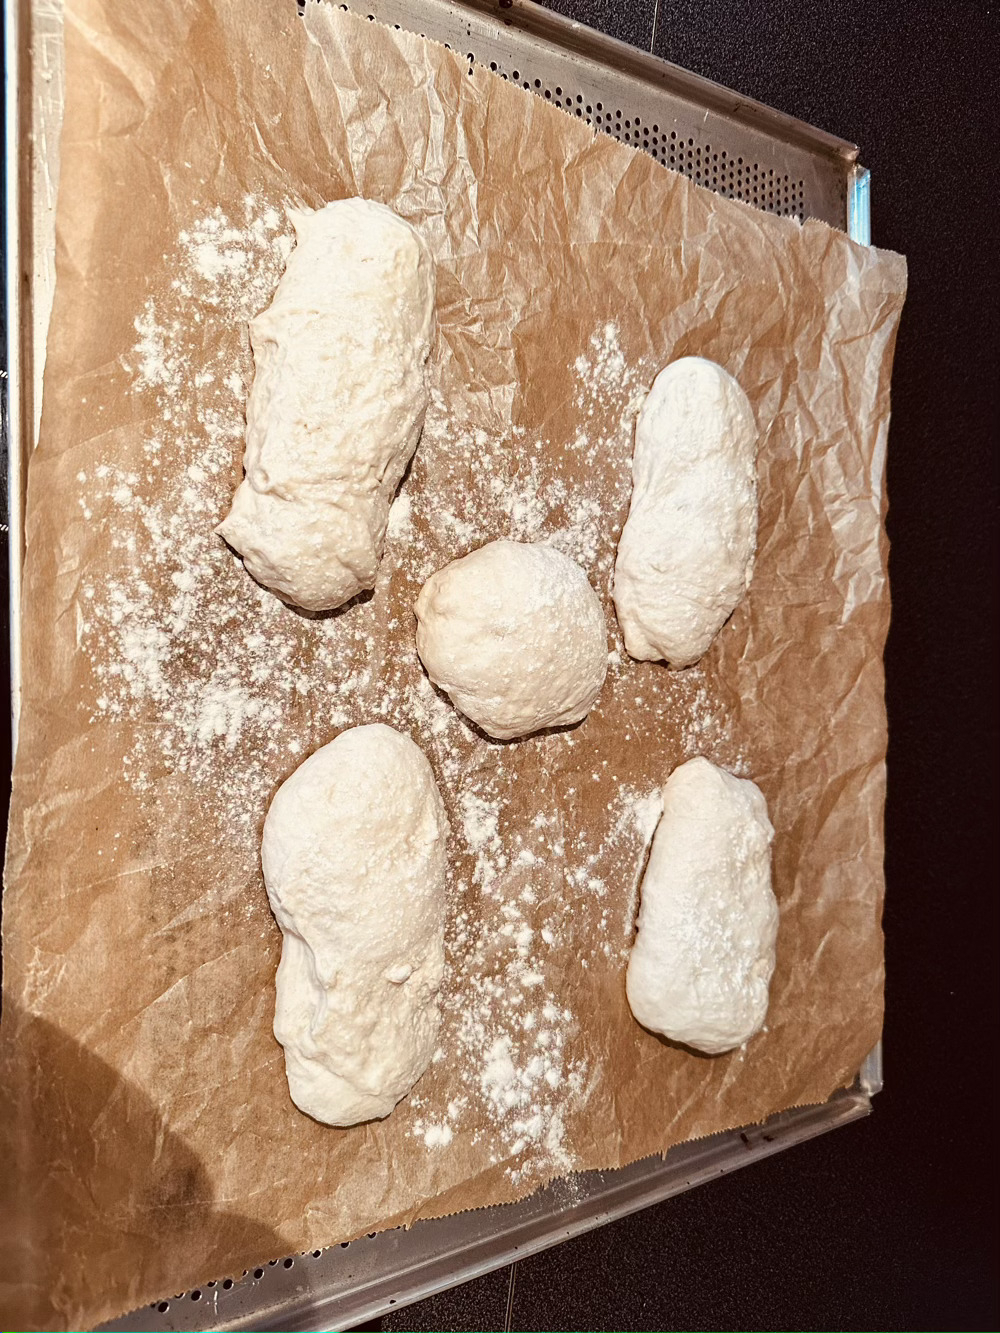 4 oblong and 1 round bread roll on baking parchment on a holed baking sheet